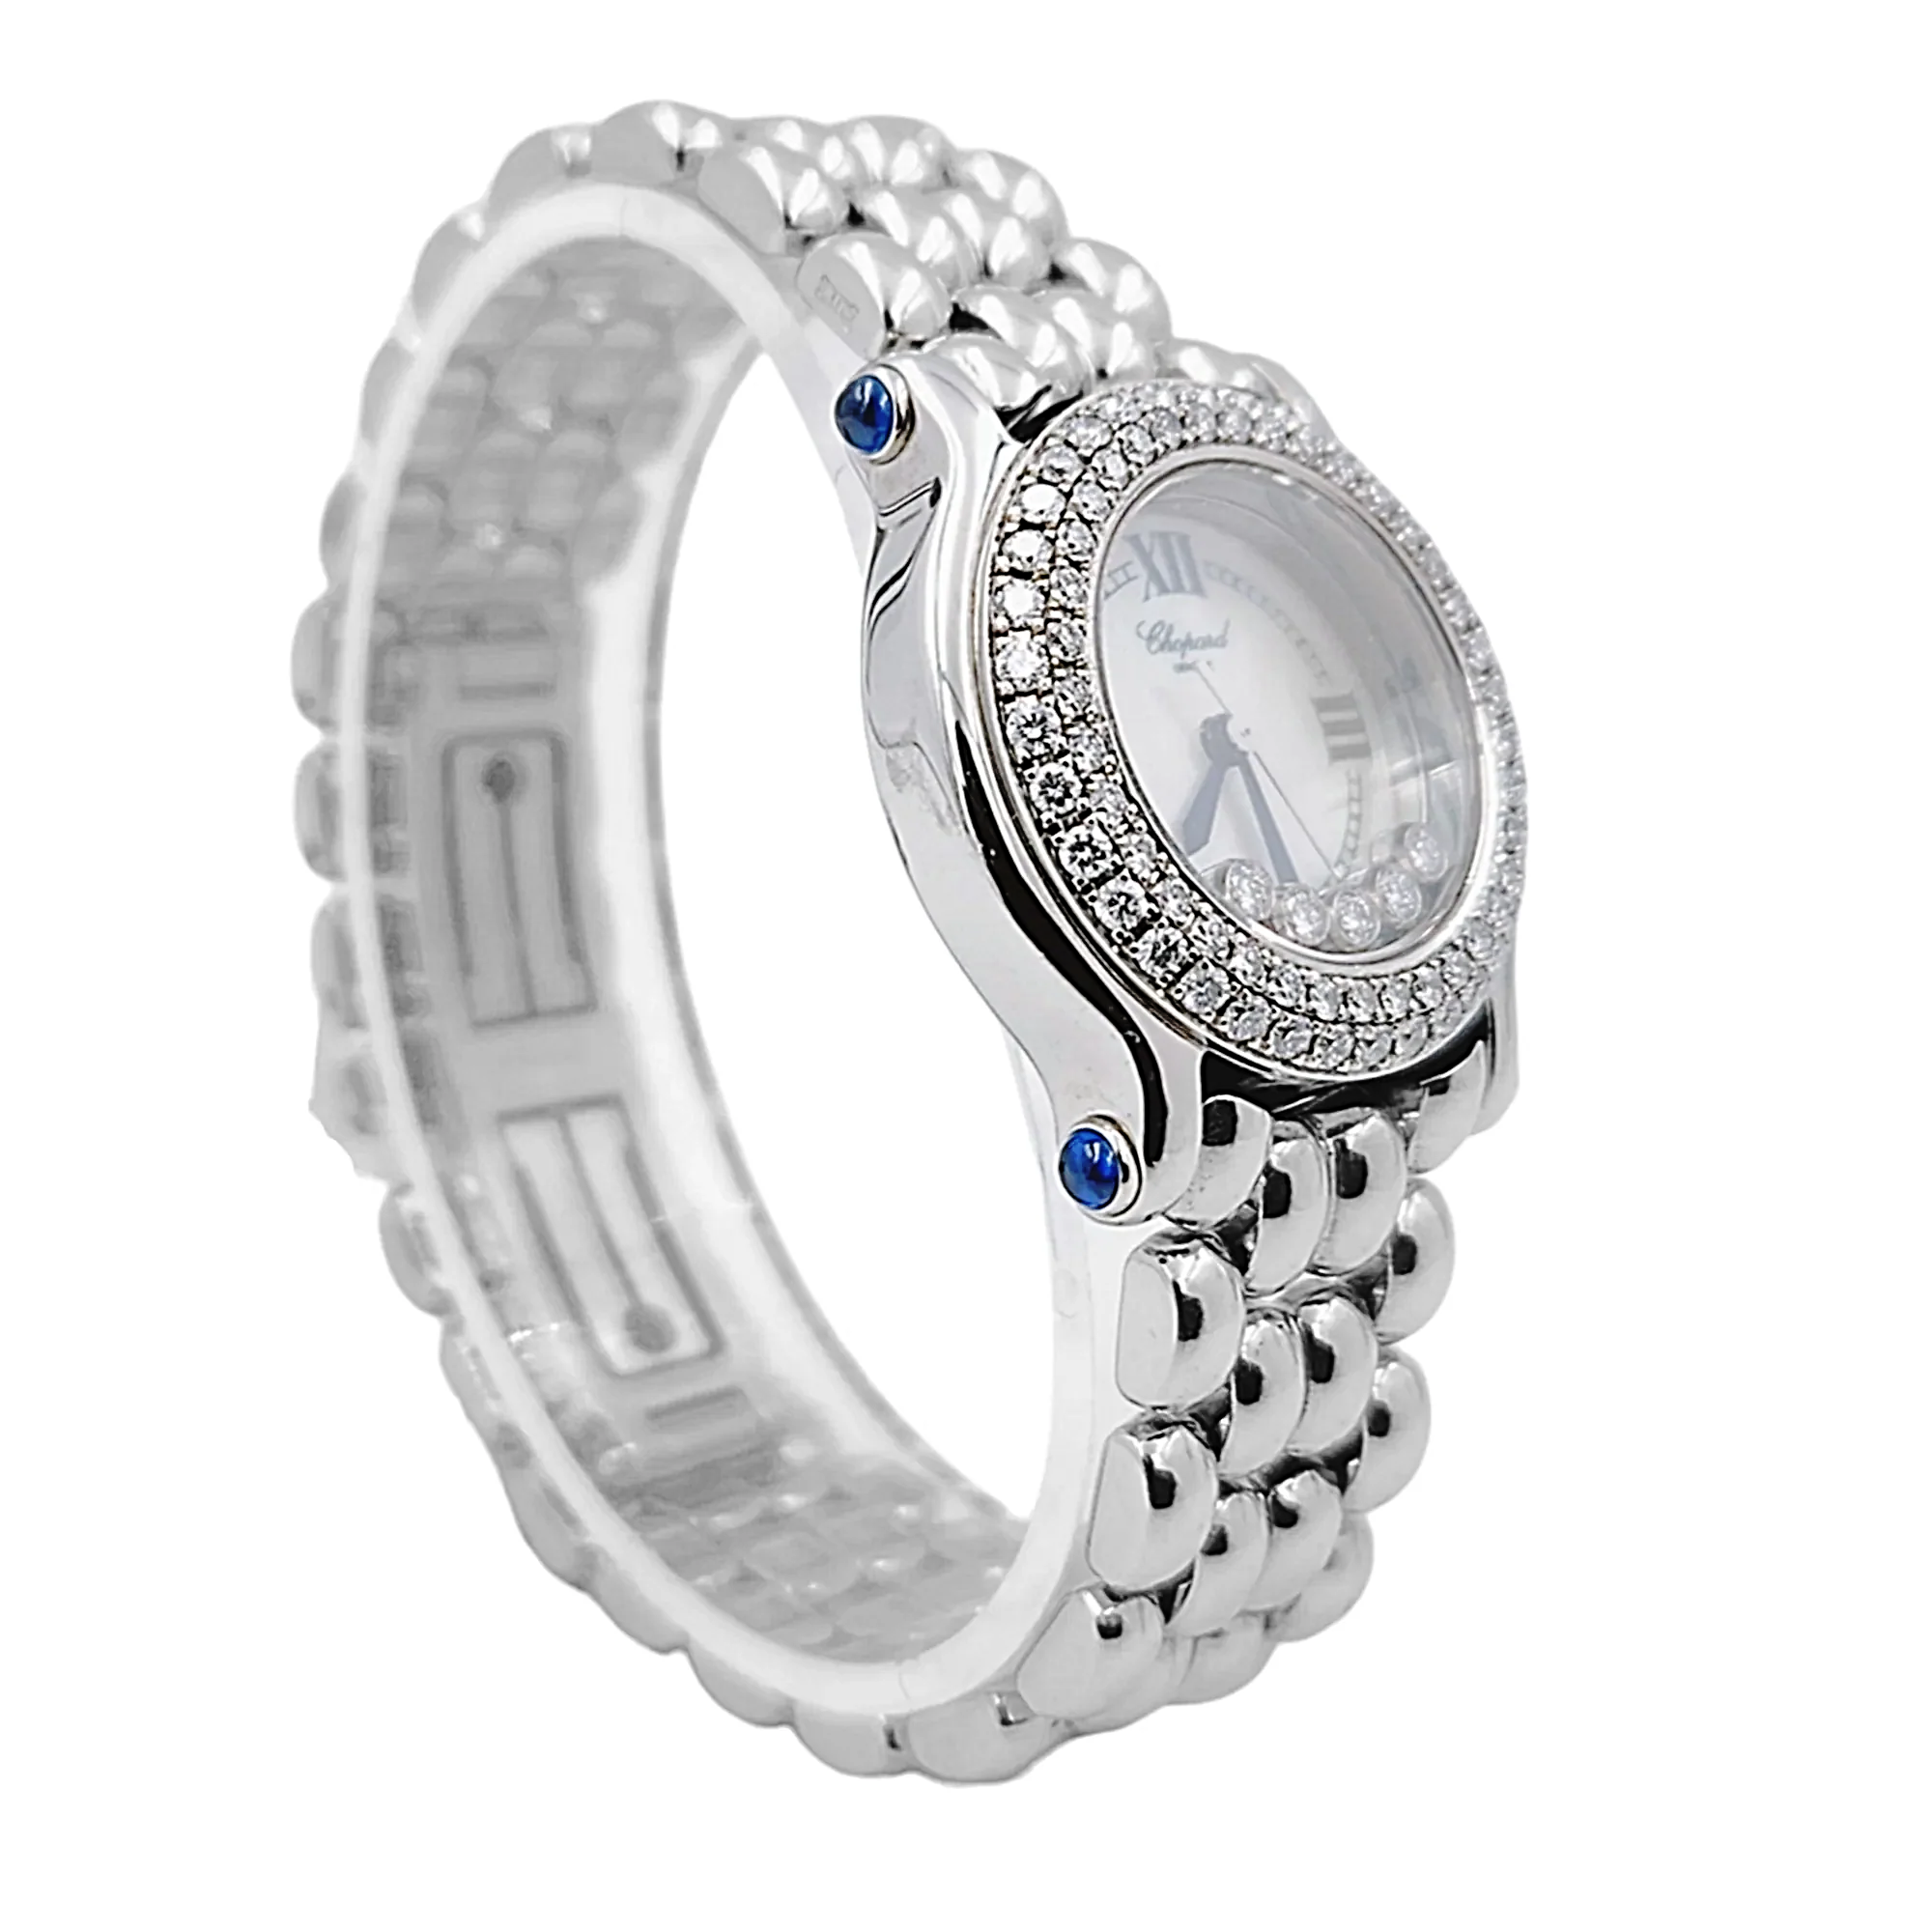 Ladies Chopard 26mm Happy Sport Five Diamond Stainless Steel Watch with Mother of Pearl Dial and Diamond Bezel. (Pre-Owned 27/8250-23)